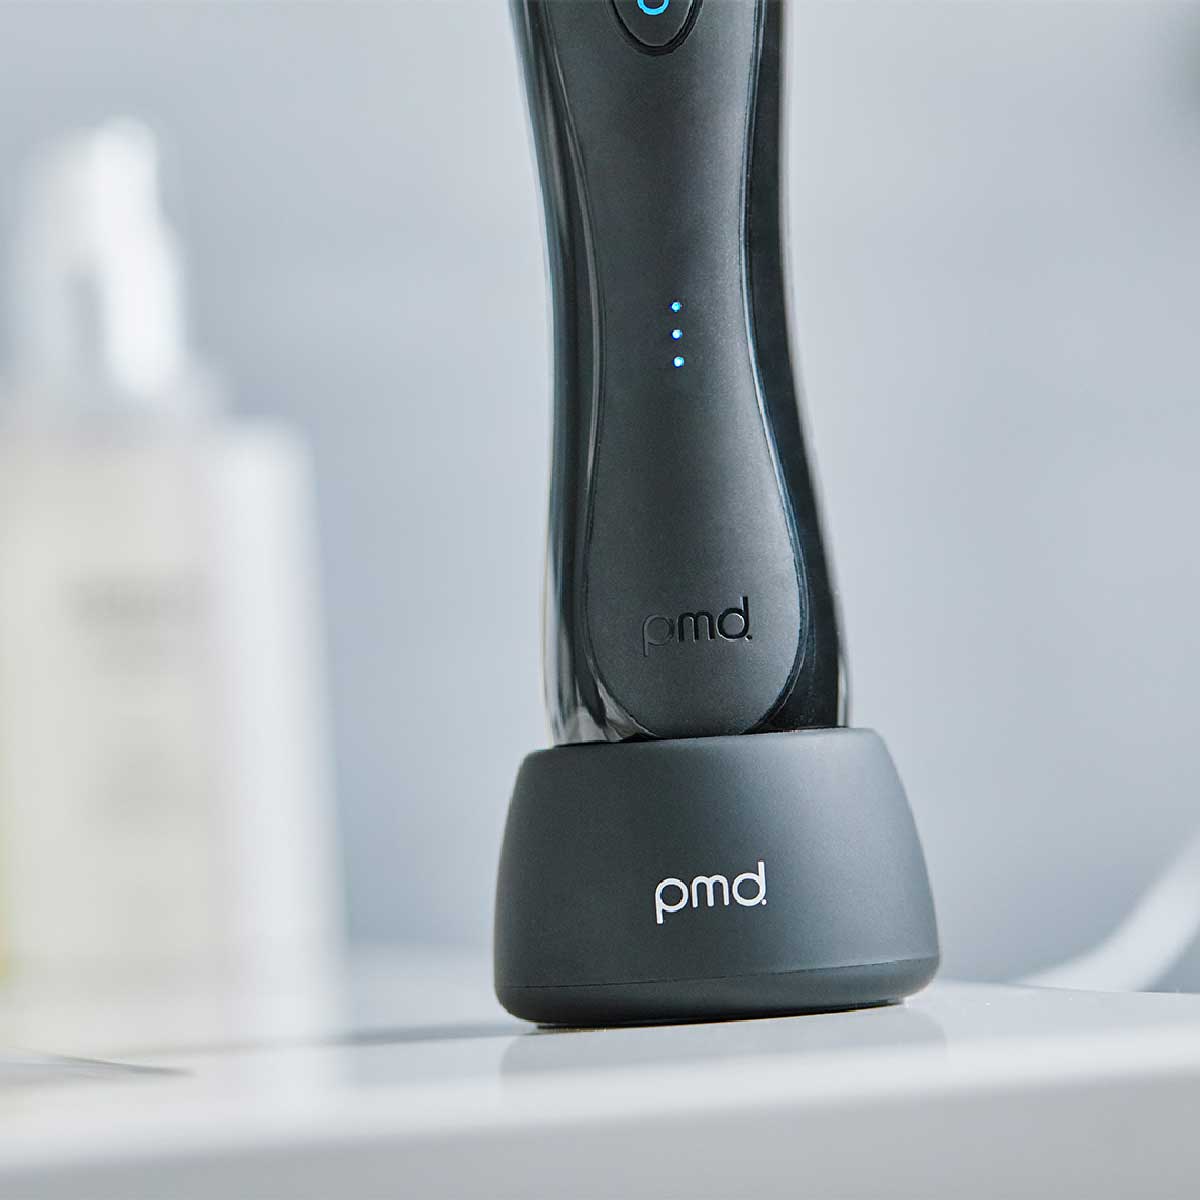 personal microderm elite pro standing in base